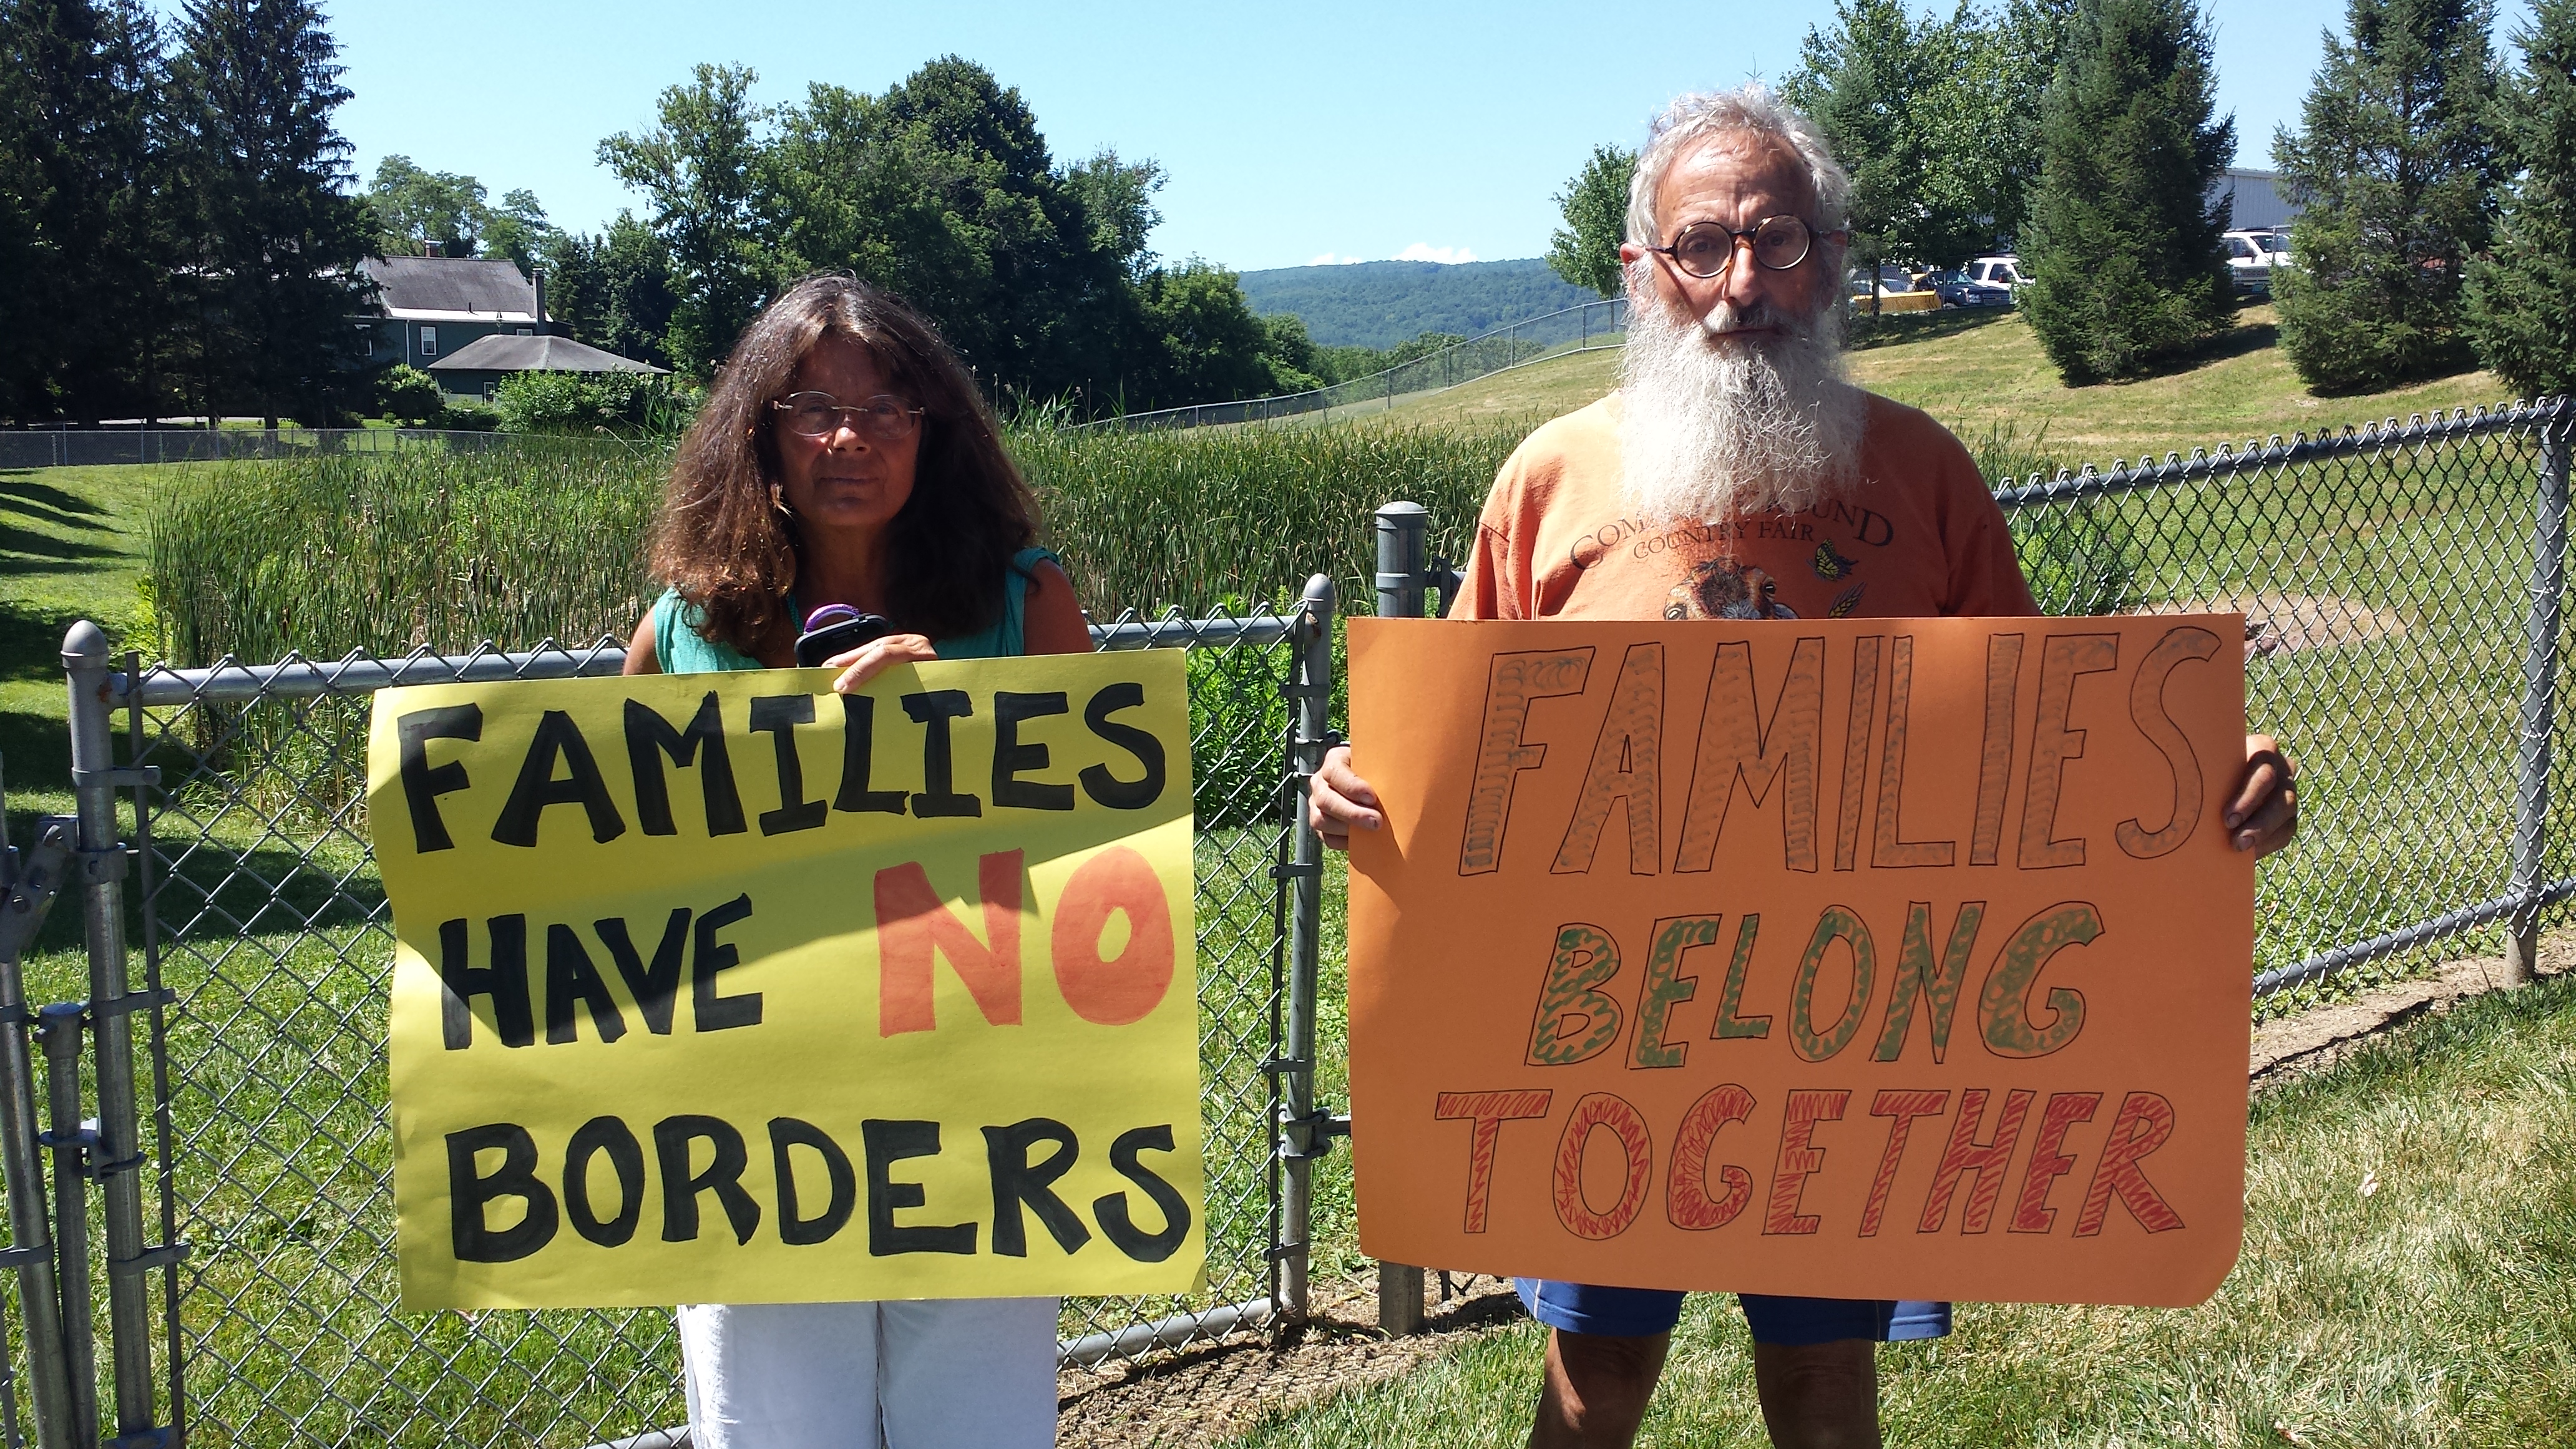 Parents bring their small children to rally at Greenfield jail and ICE facility opposing family separation practices